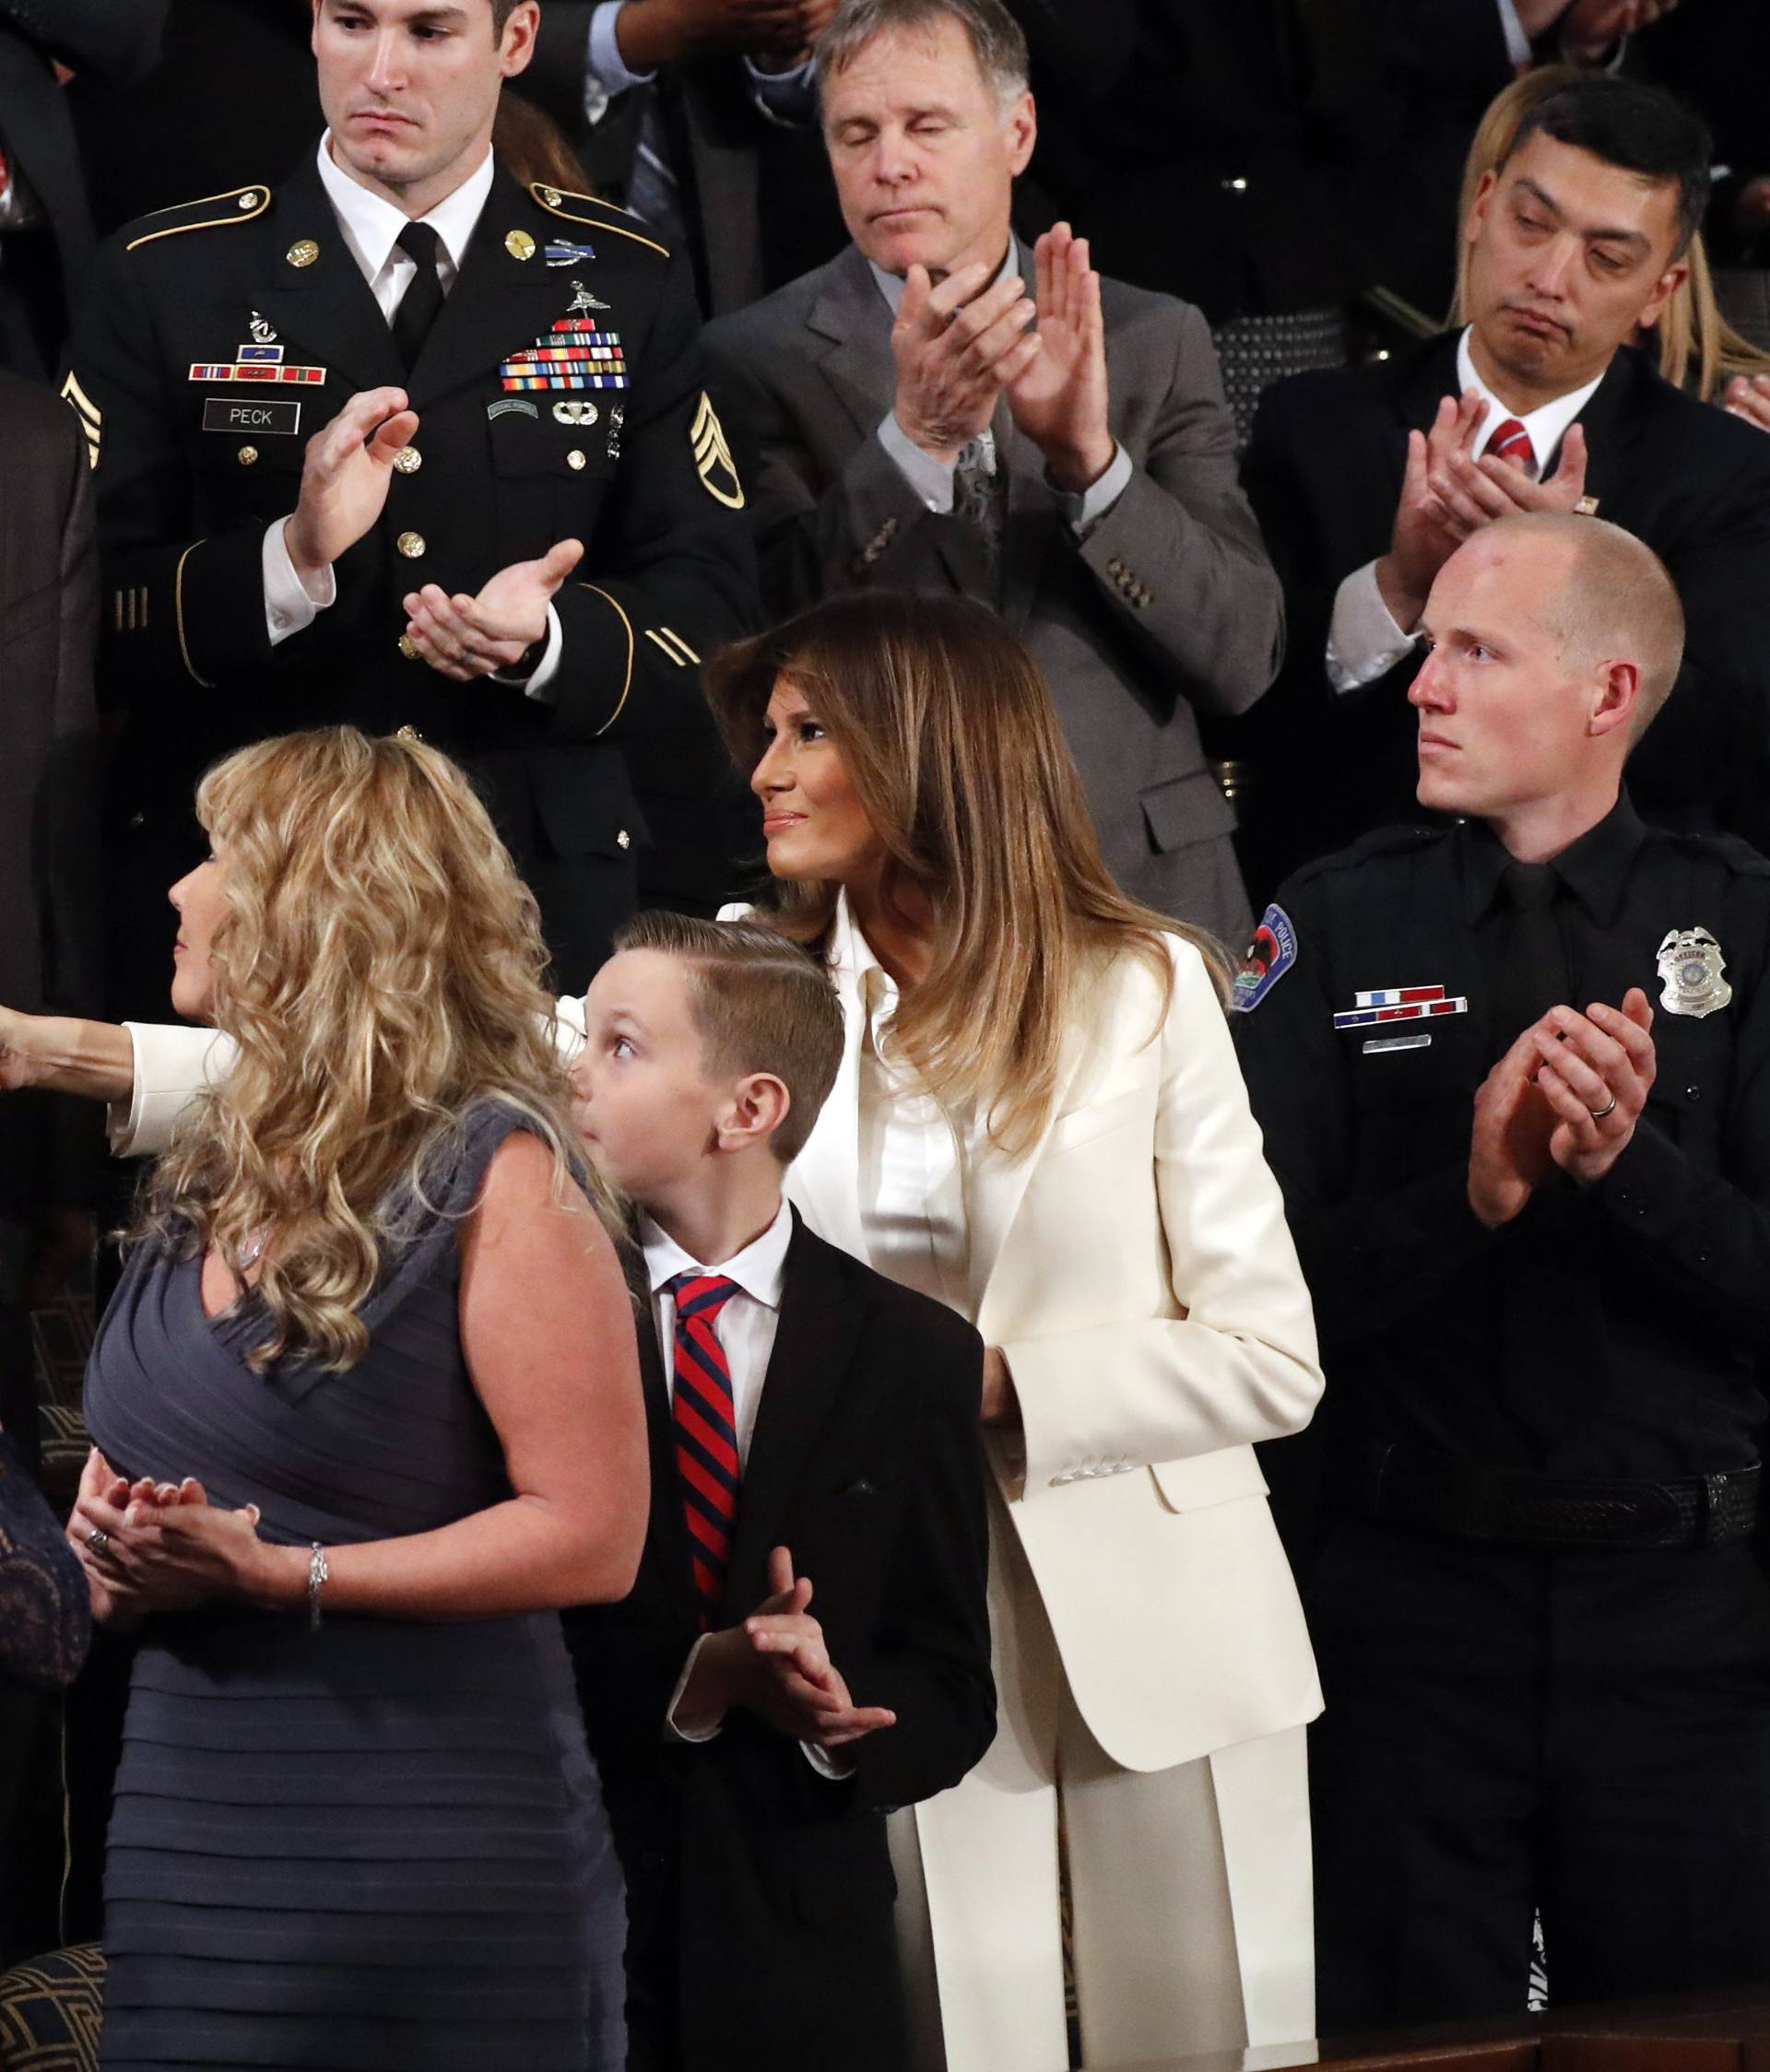 Melania Trump greets guests during President Trump's State of the Union address in Washington